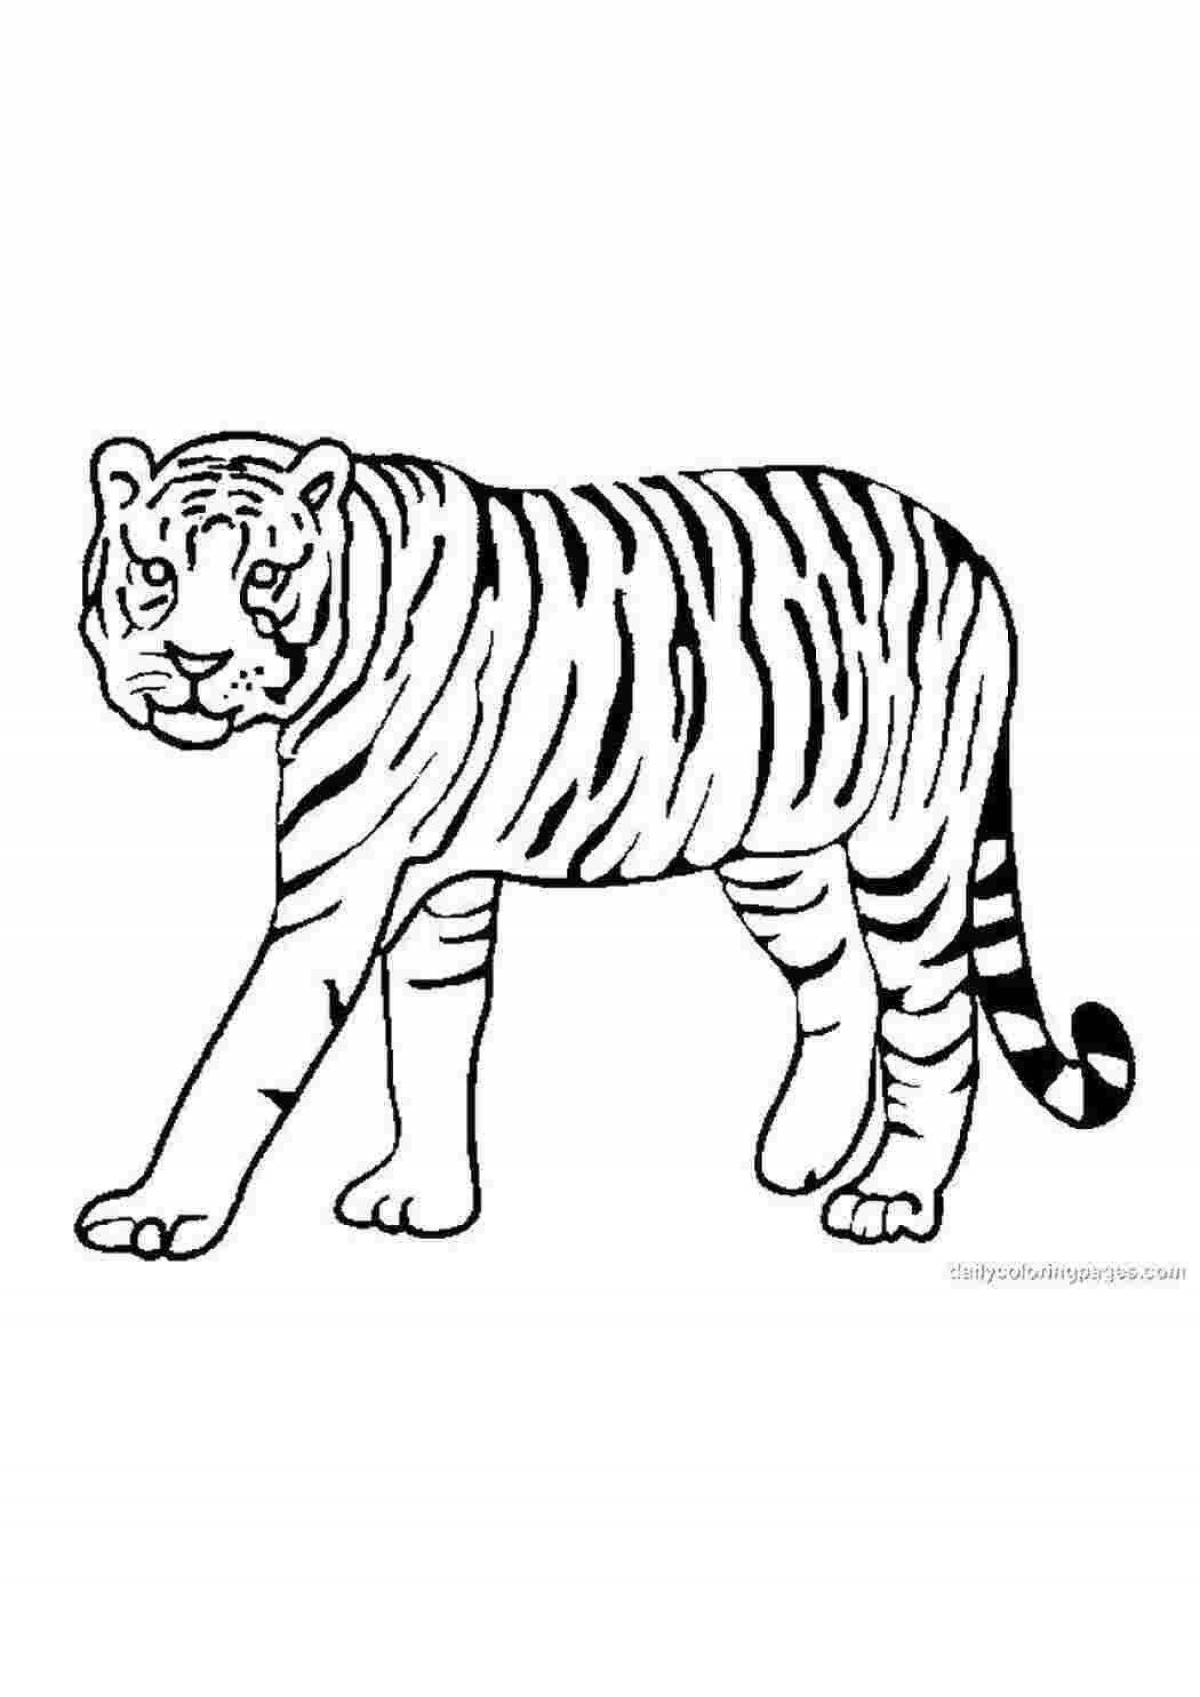 Colorful tiger without stripes for kids